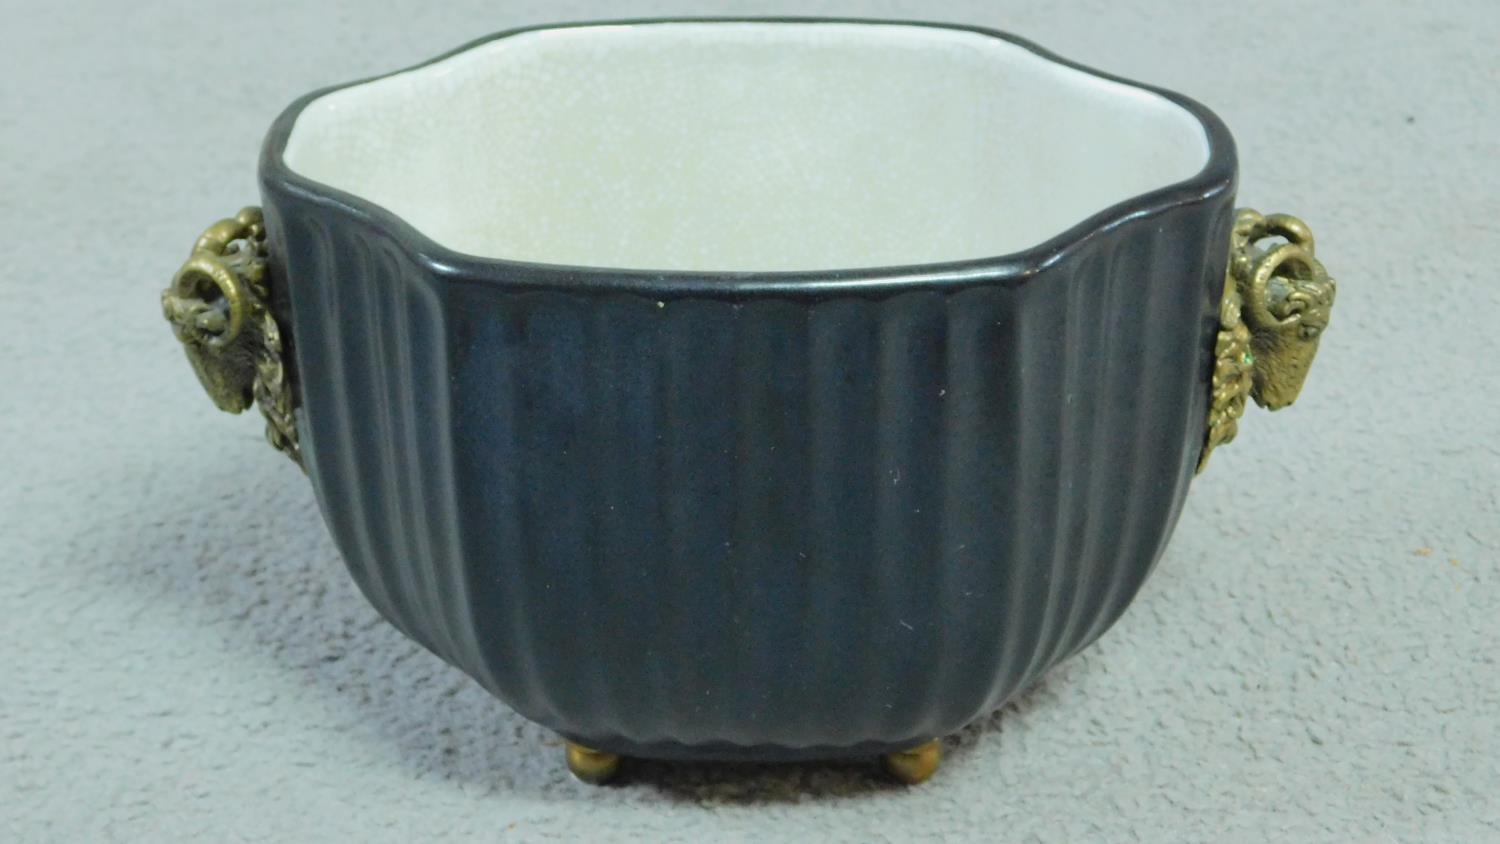 A Black antique style ribbed porcelain planter with two brass buck heads and mounted on brass